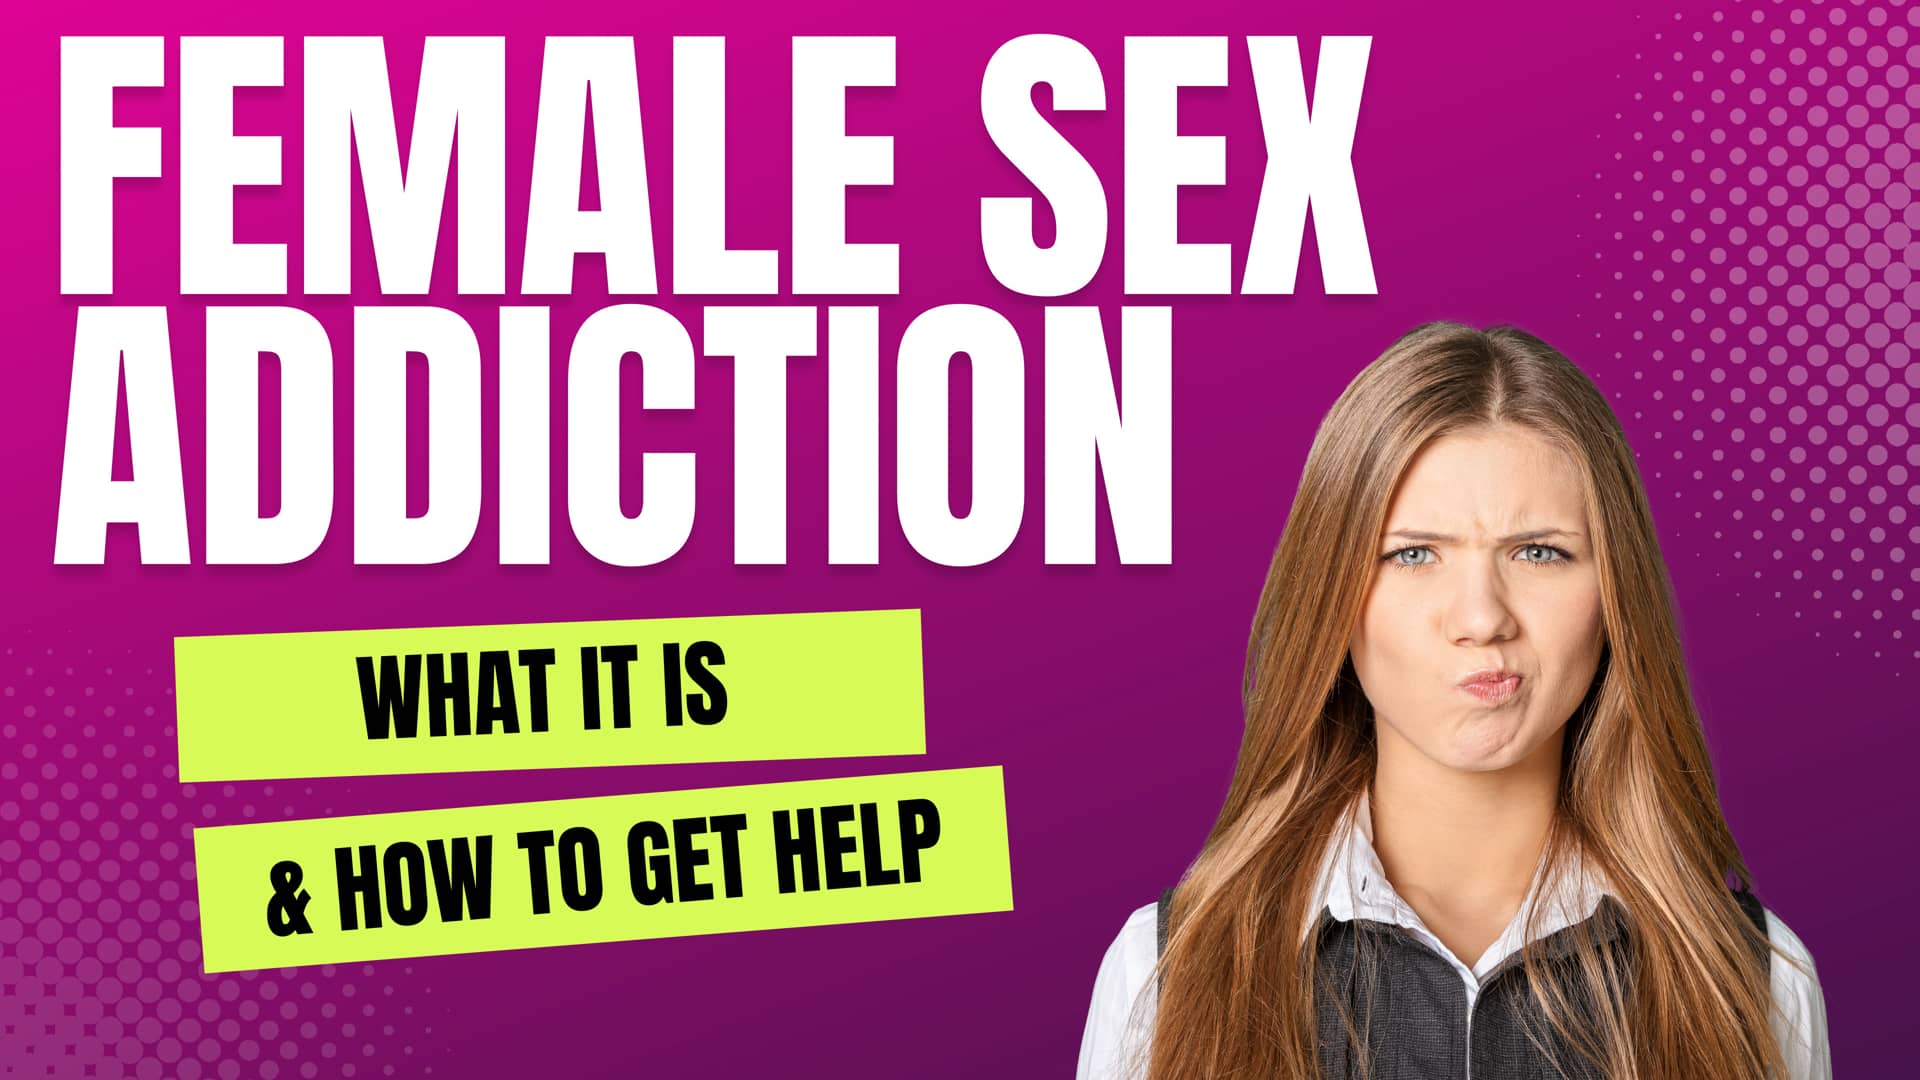 Female Sex Addiction What It Is And How To Get Help Can Women Be Sex Addicts Dr Doug